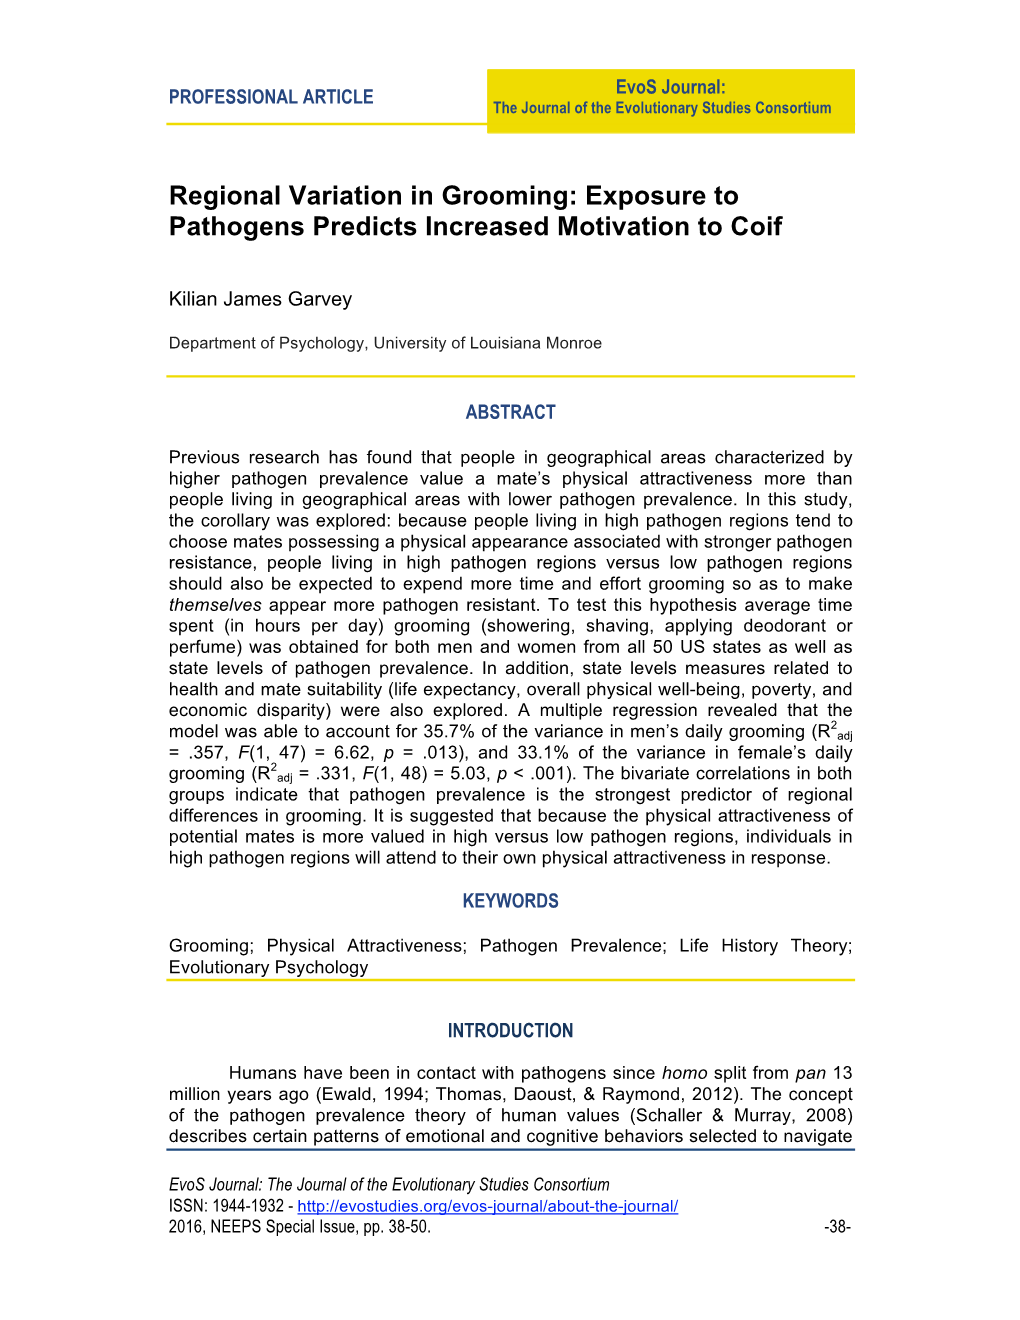 Regional Variation in Grooming: Exposure to Pathogens Predicts Increased Motivation to Coif